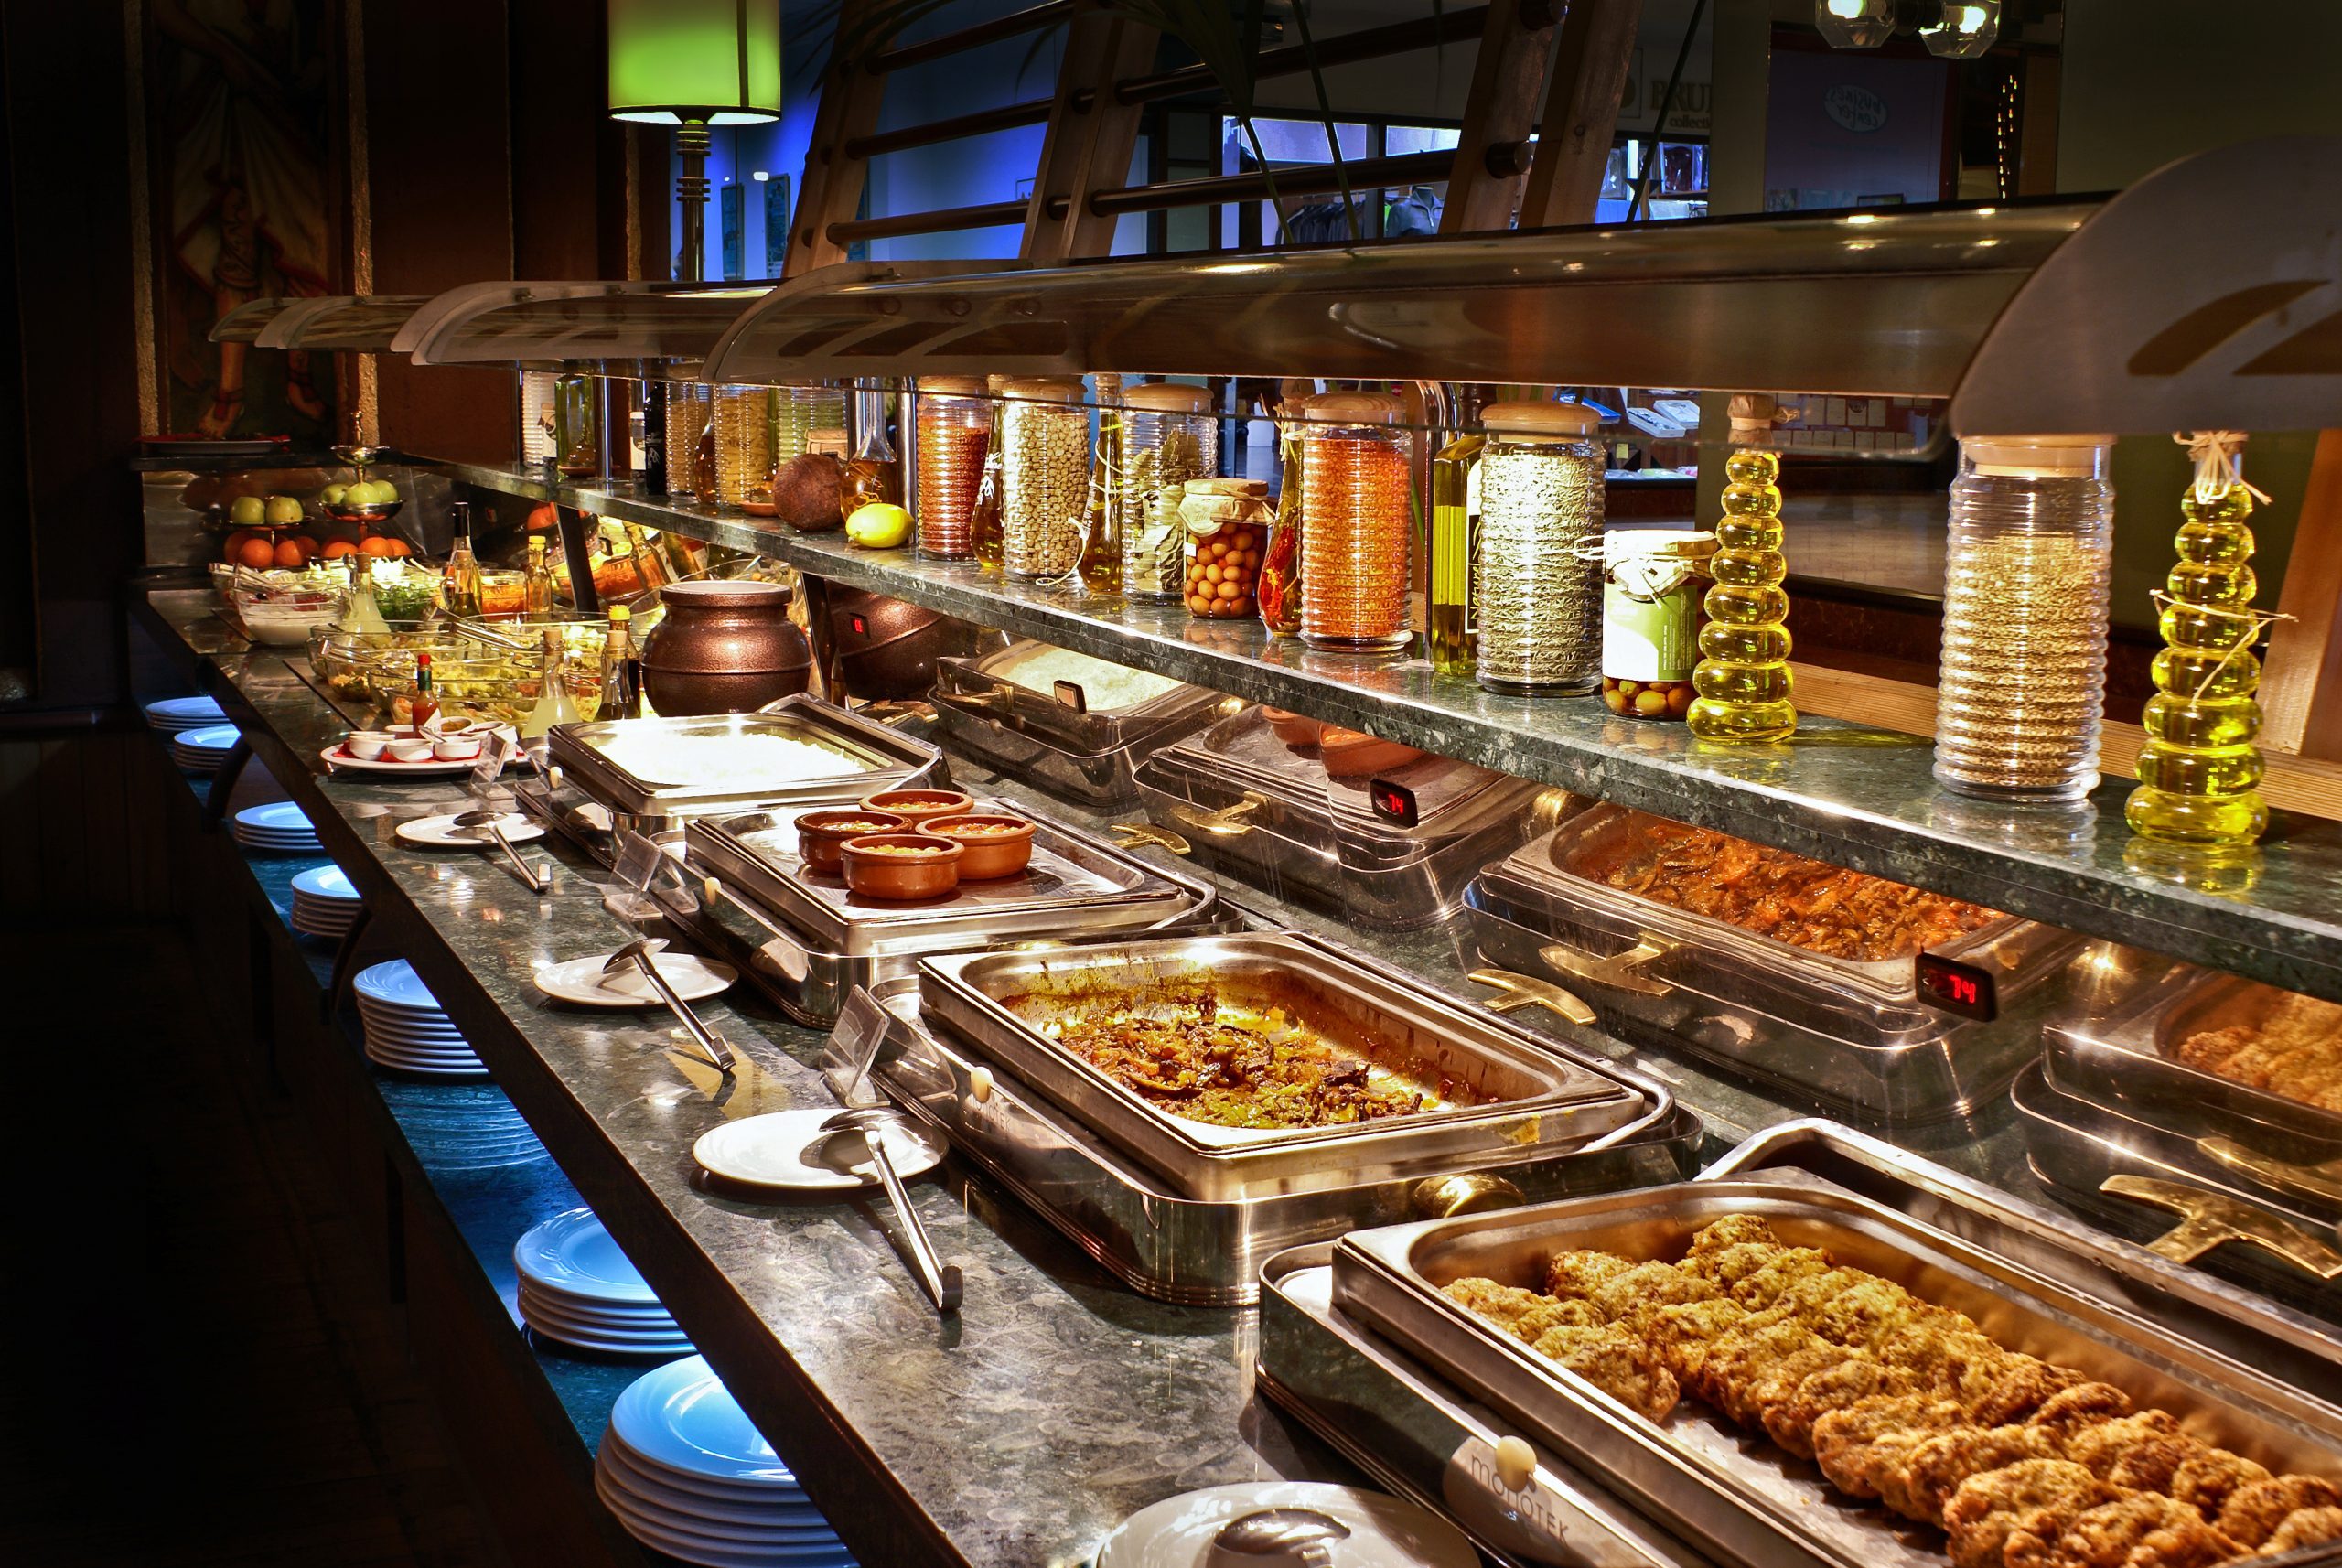 How to prepare yourself for an unlimited buffet?